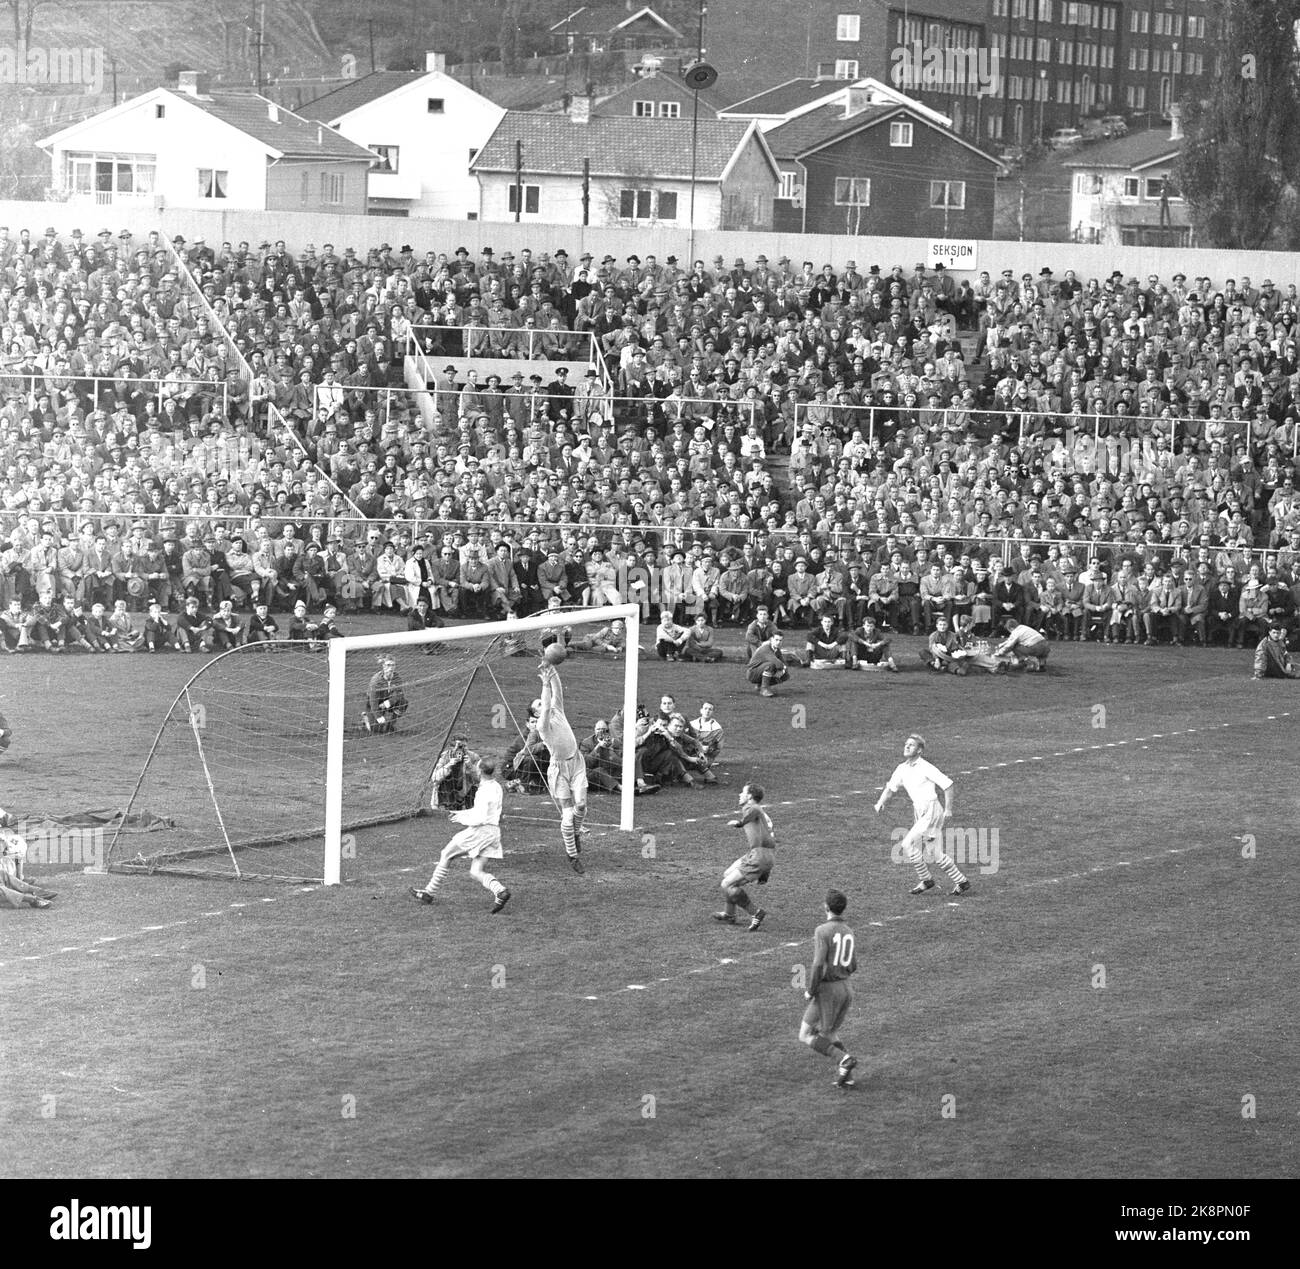 Oslo, 19561021. The cup final at Ullevaal Stadium. Larvik Turn - Skeid 1-2. Here's great chance ahead of one goal. Photo: Current / NTB Stock Photo